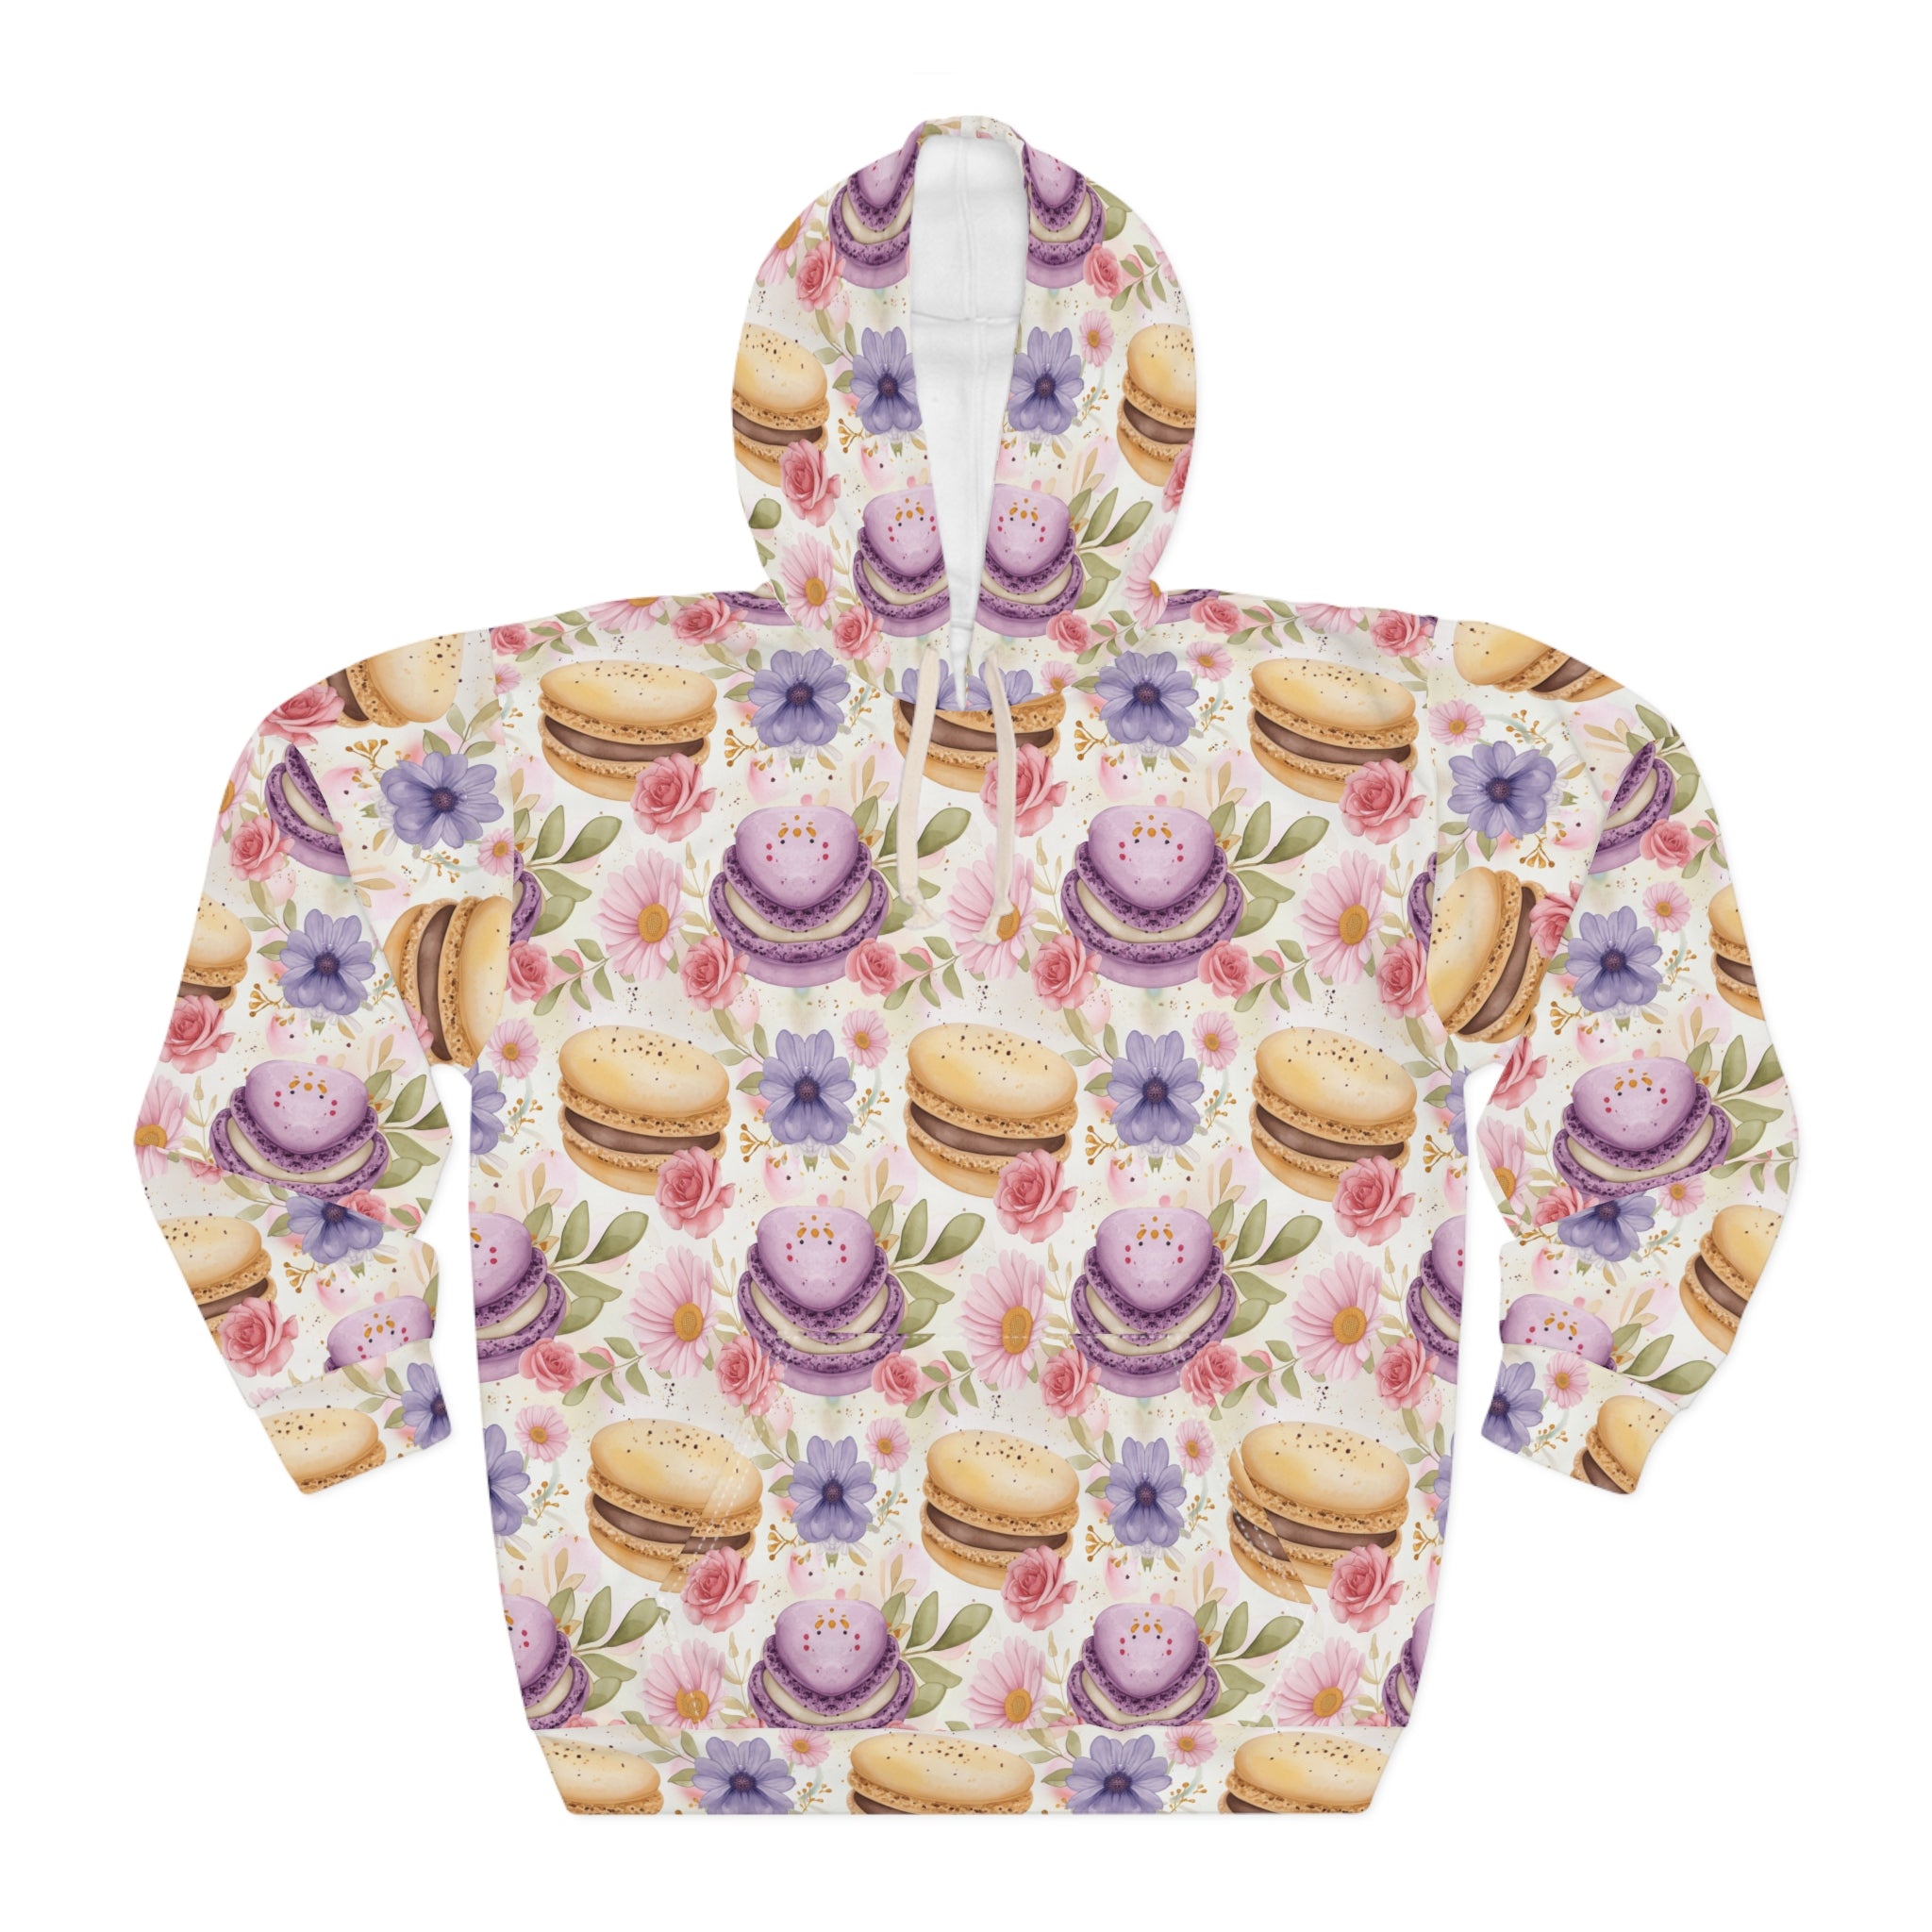 For Lovers of Macaroons! Stylish Macaroon Pattern Unisex Pullover Hoodie (AOP) - Trendy All-Over Print Sweatshirt for Fashion Enthusiasts or Foodies Who Love Pastry